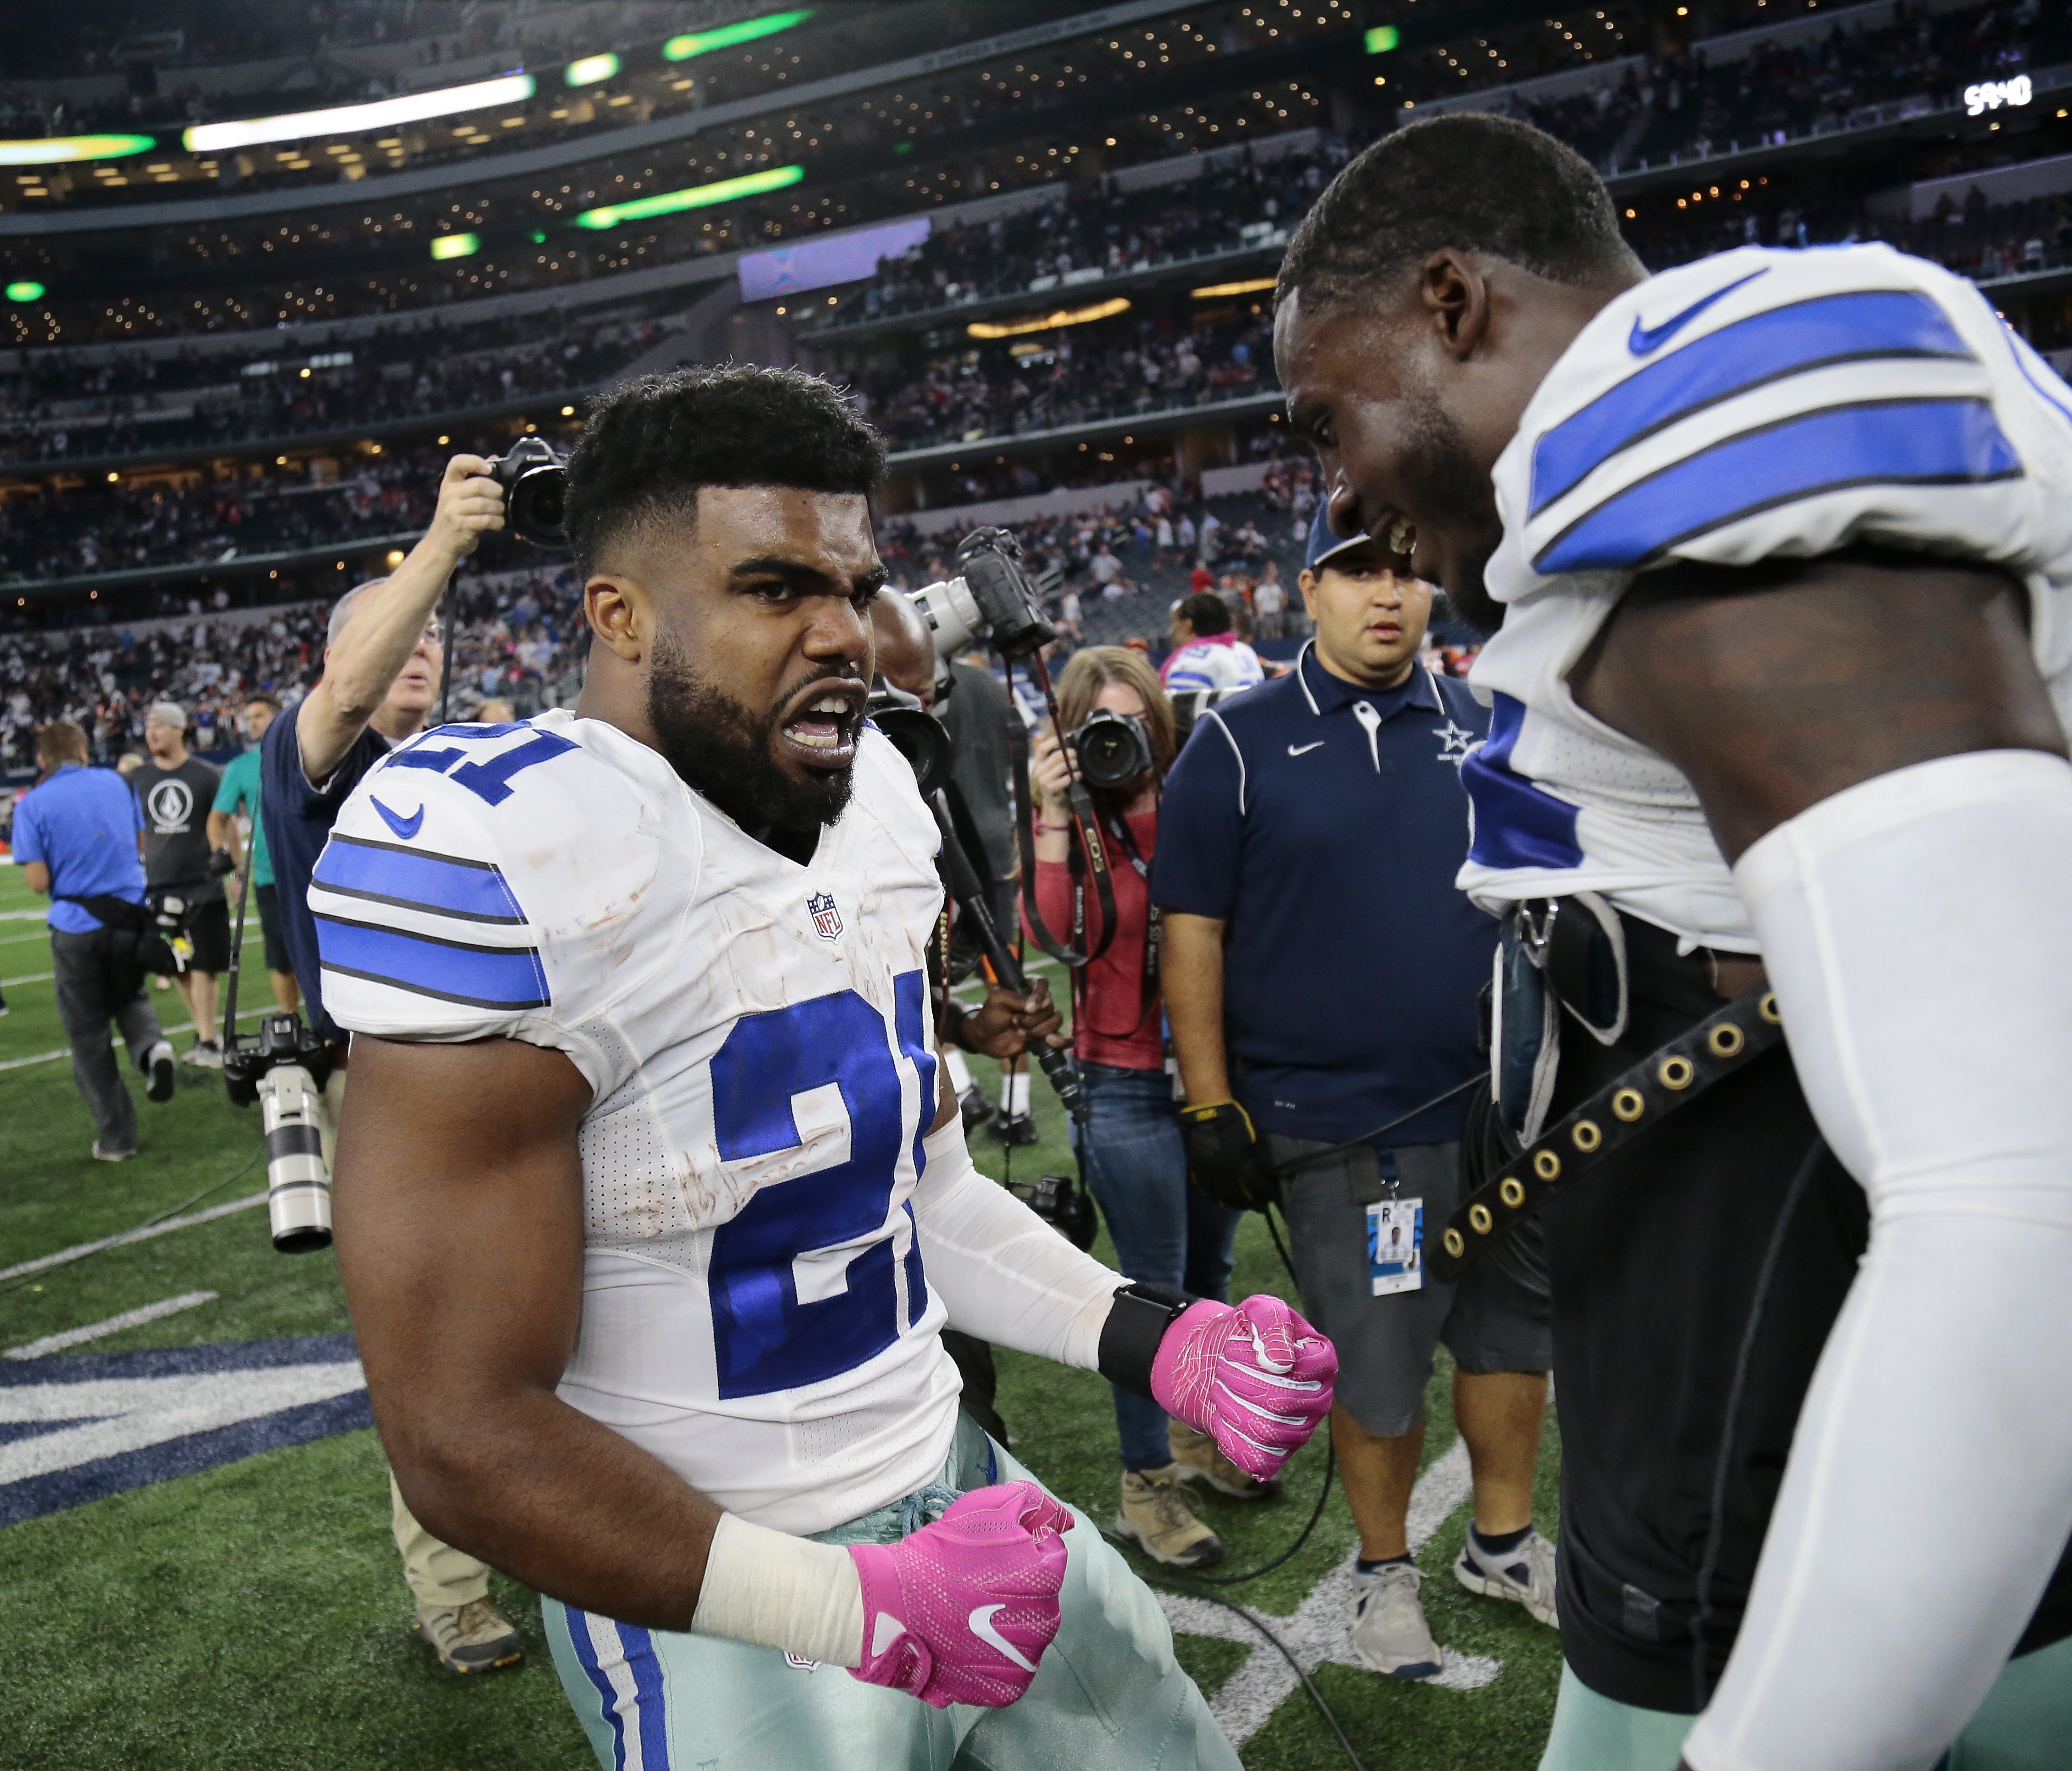 Dallas Cowboys running back Ezekiel Elliott has been suspended the first six games of the 2017 season for a domestic abuse allegation.